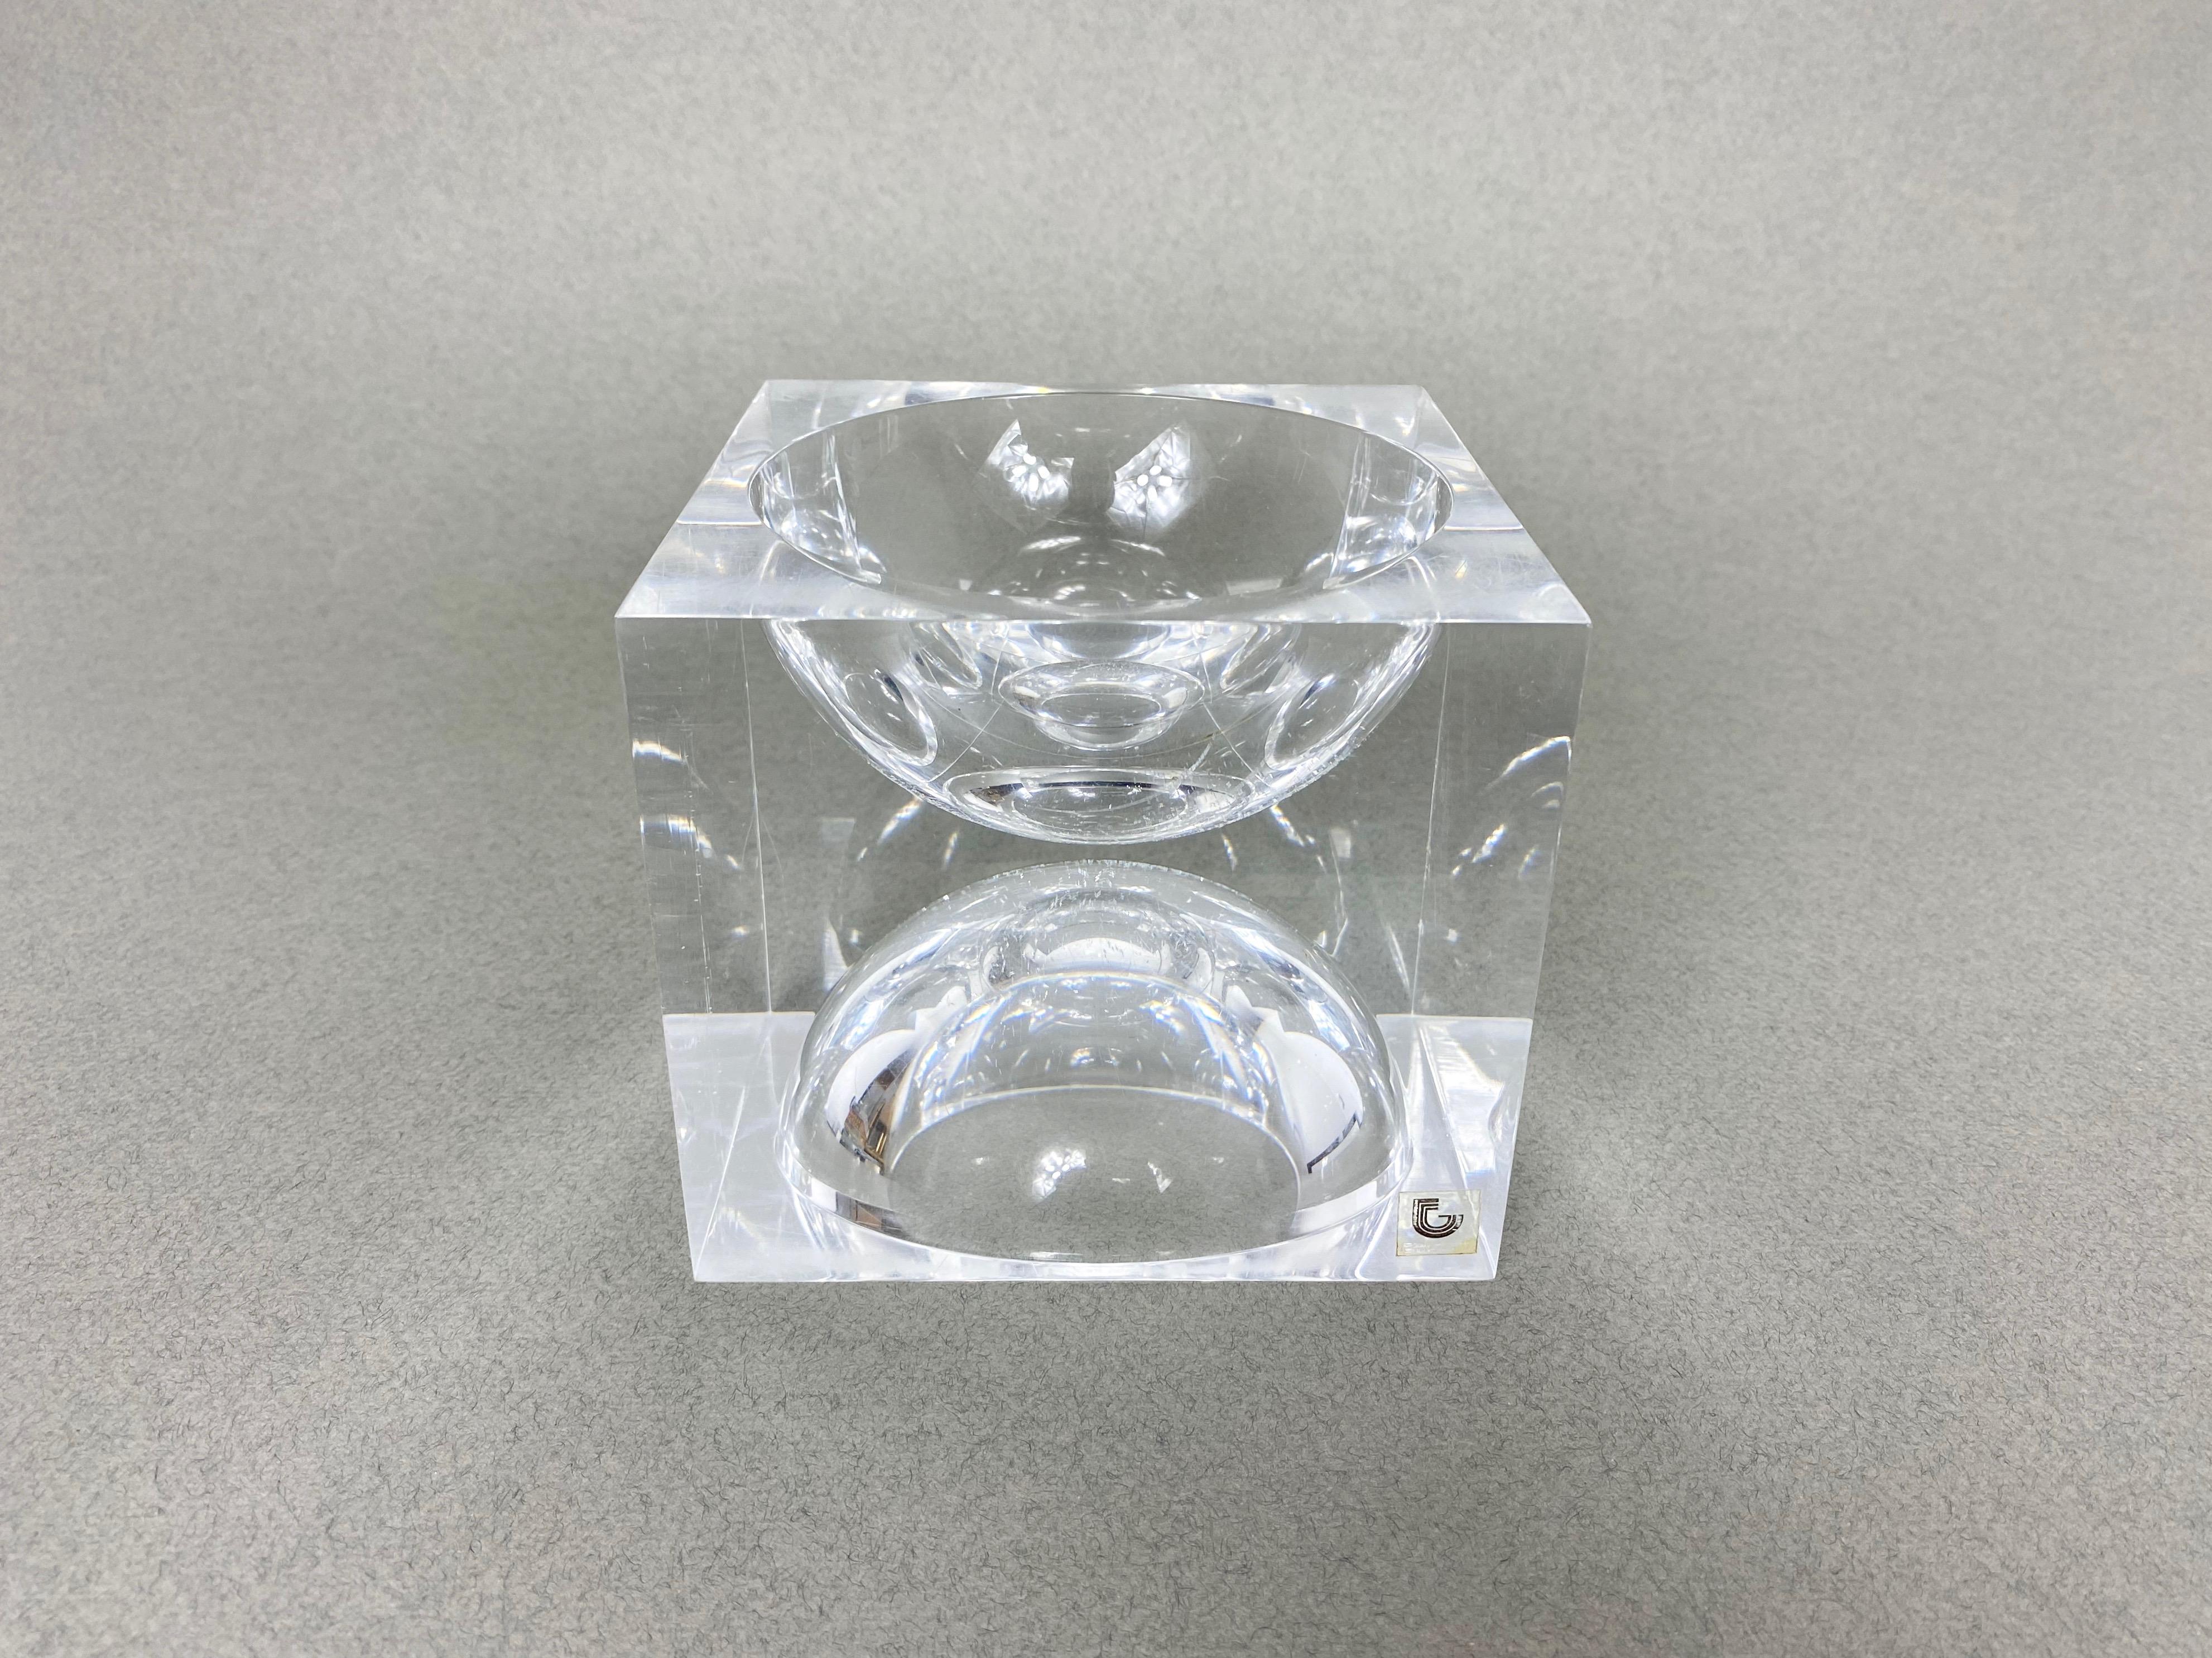 Lucite Acrylic Cubic Sculpture by Team Guzzini, Italy, 1970s Spiral Geometry 10